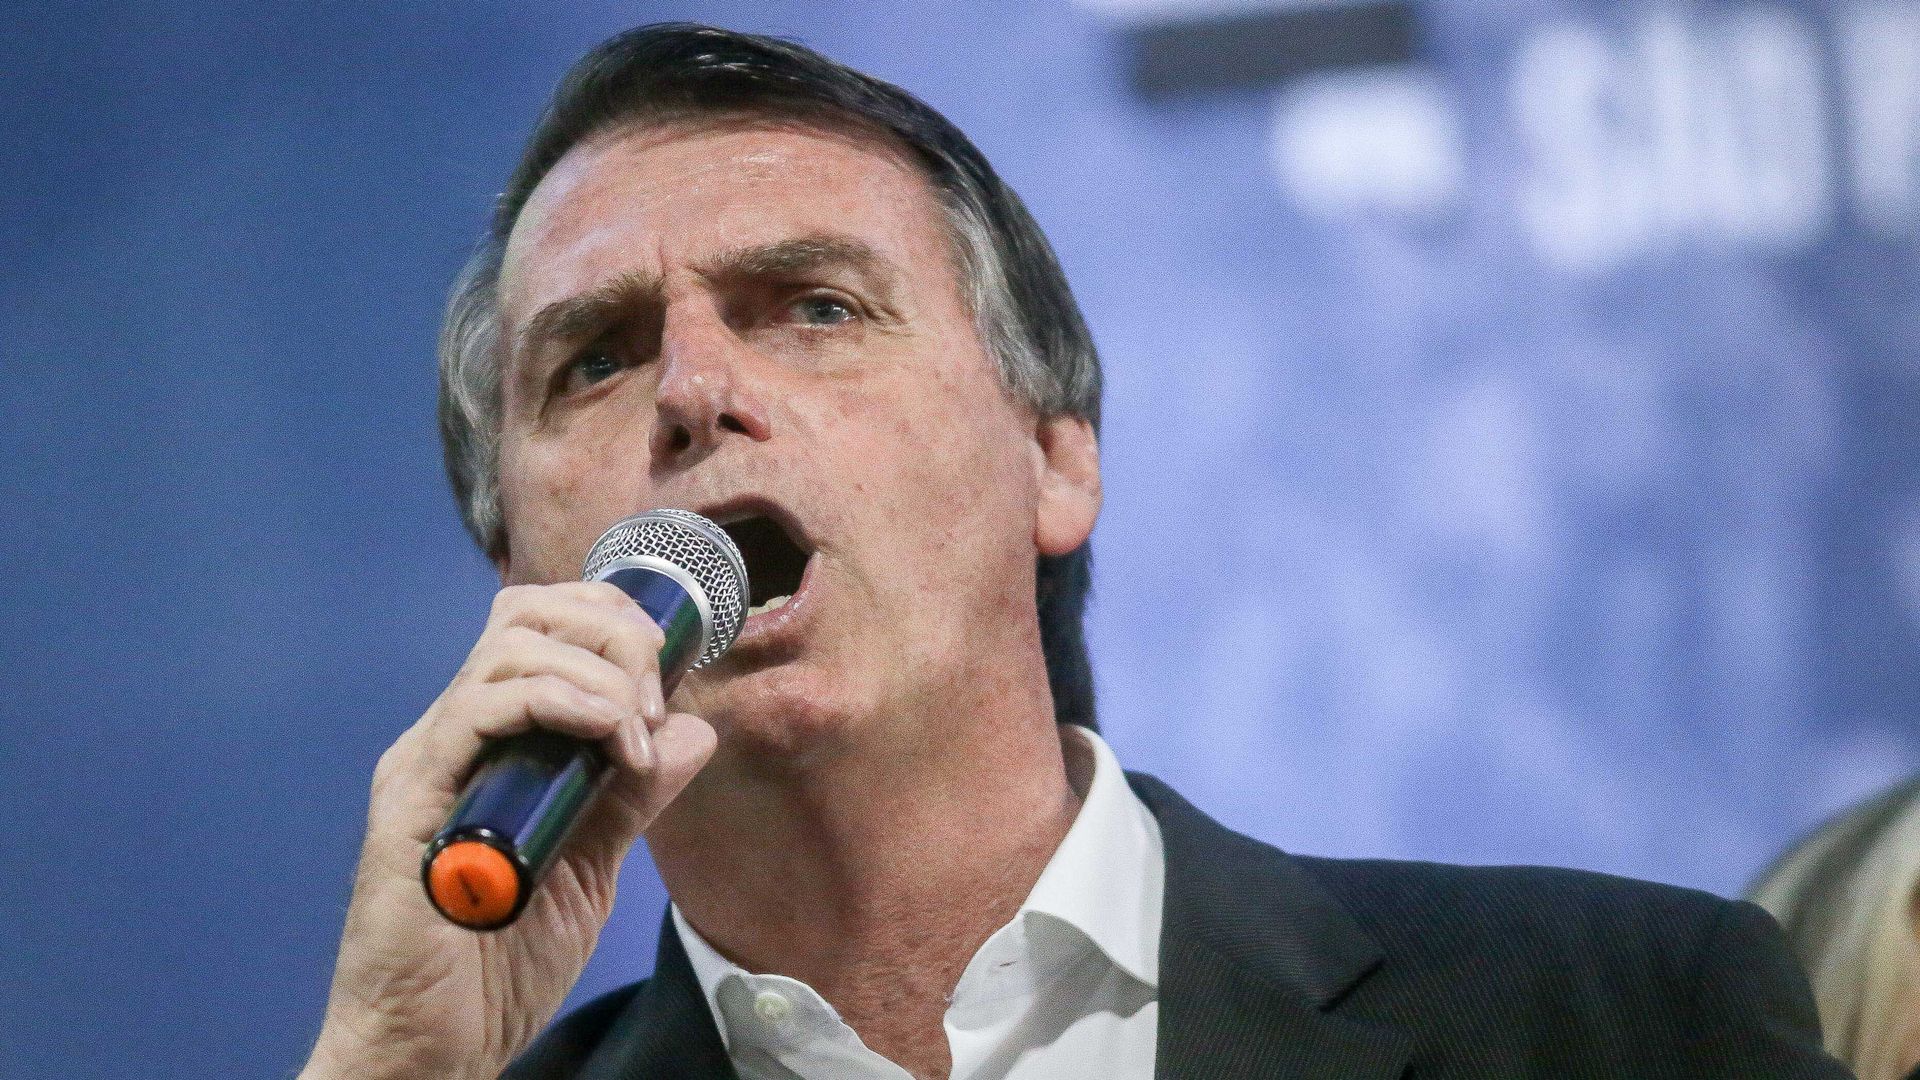 Jair Bolsonaro, Brazilian presidential candidate for the Social Liberal Party, during his political party in Sao Paulo, Brazil, on August 5, 2018. 